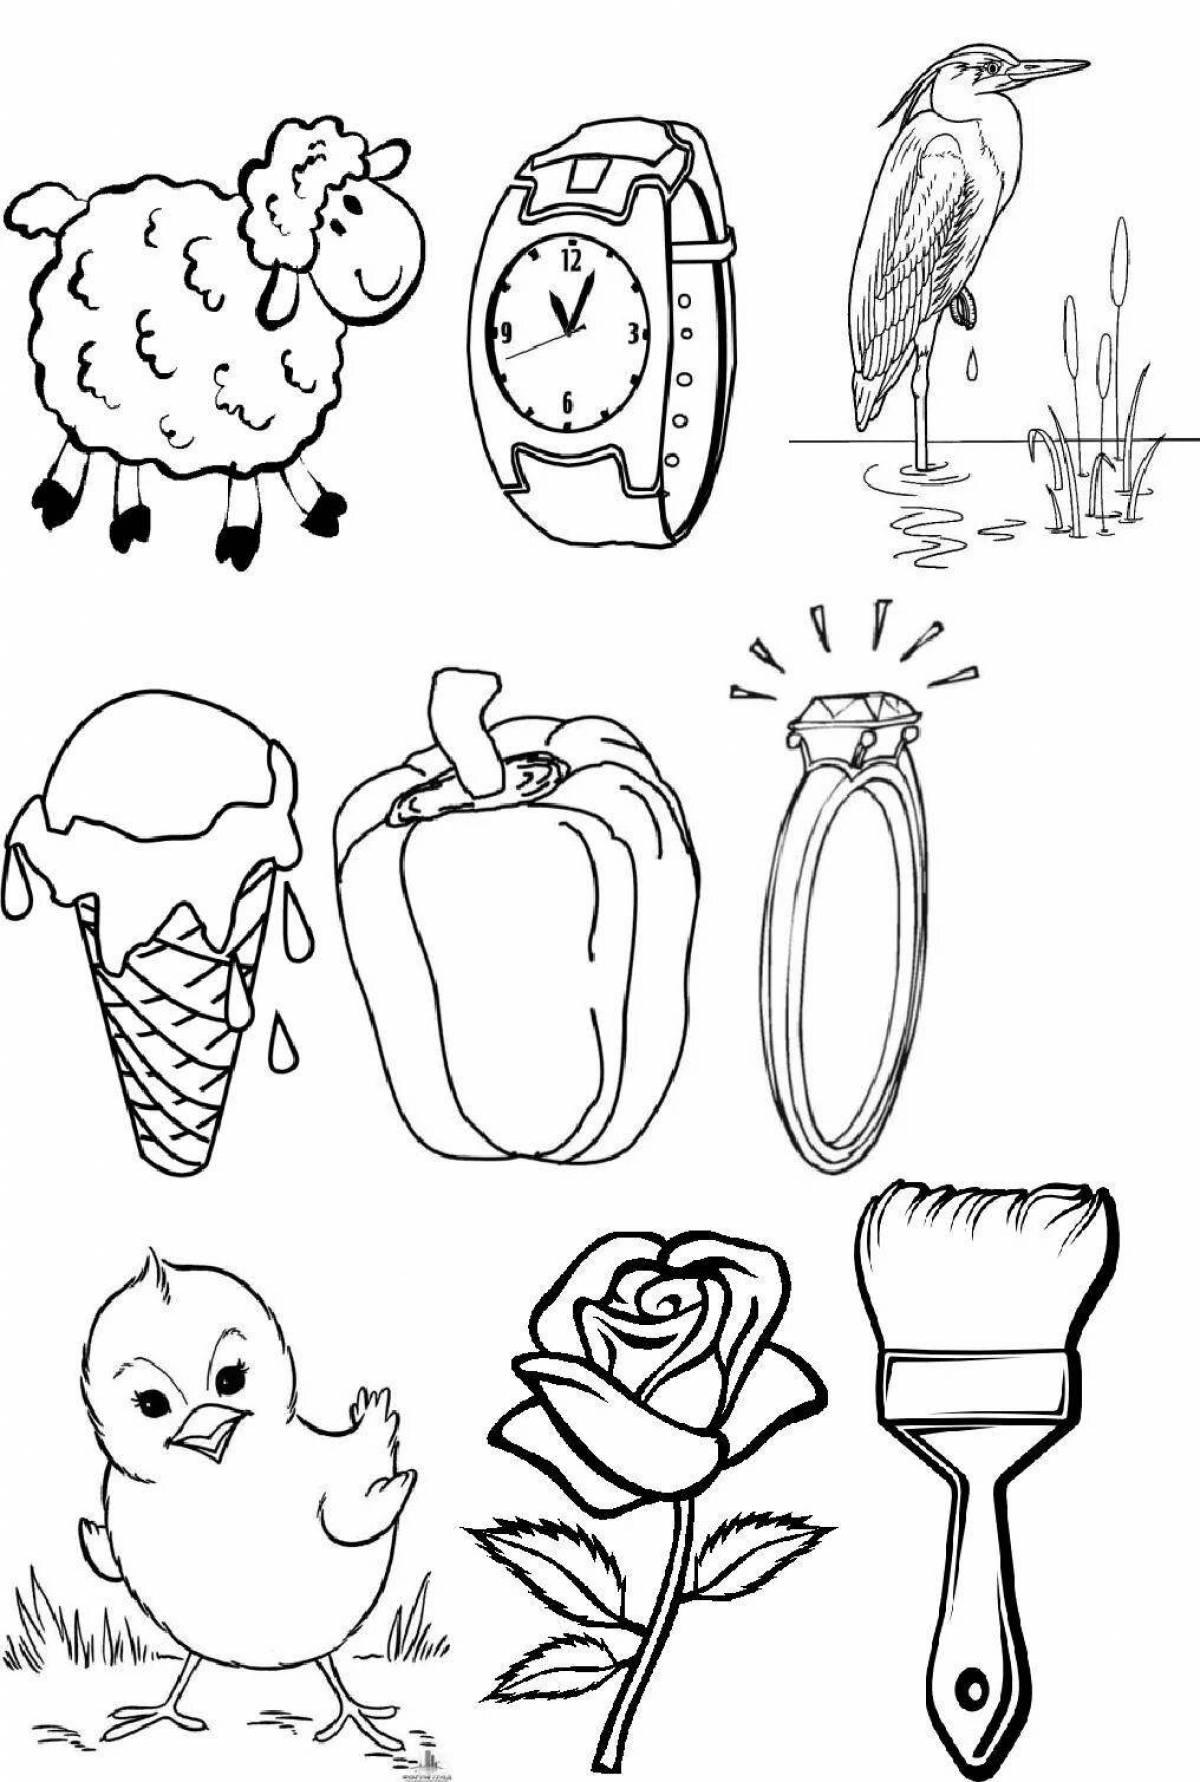 Playful speech therapy class coloring page